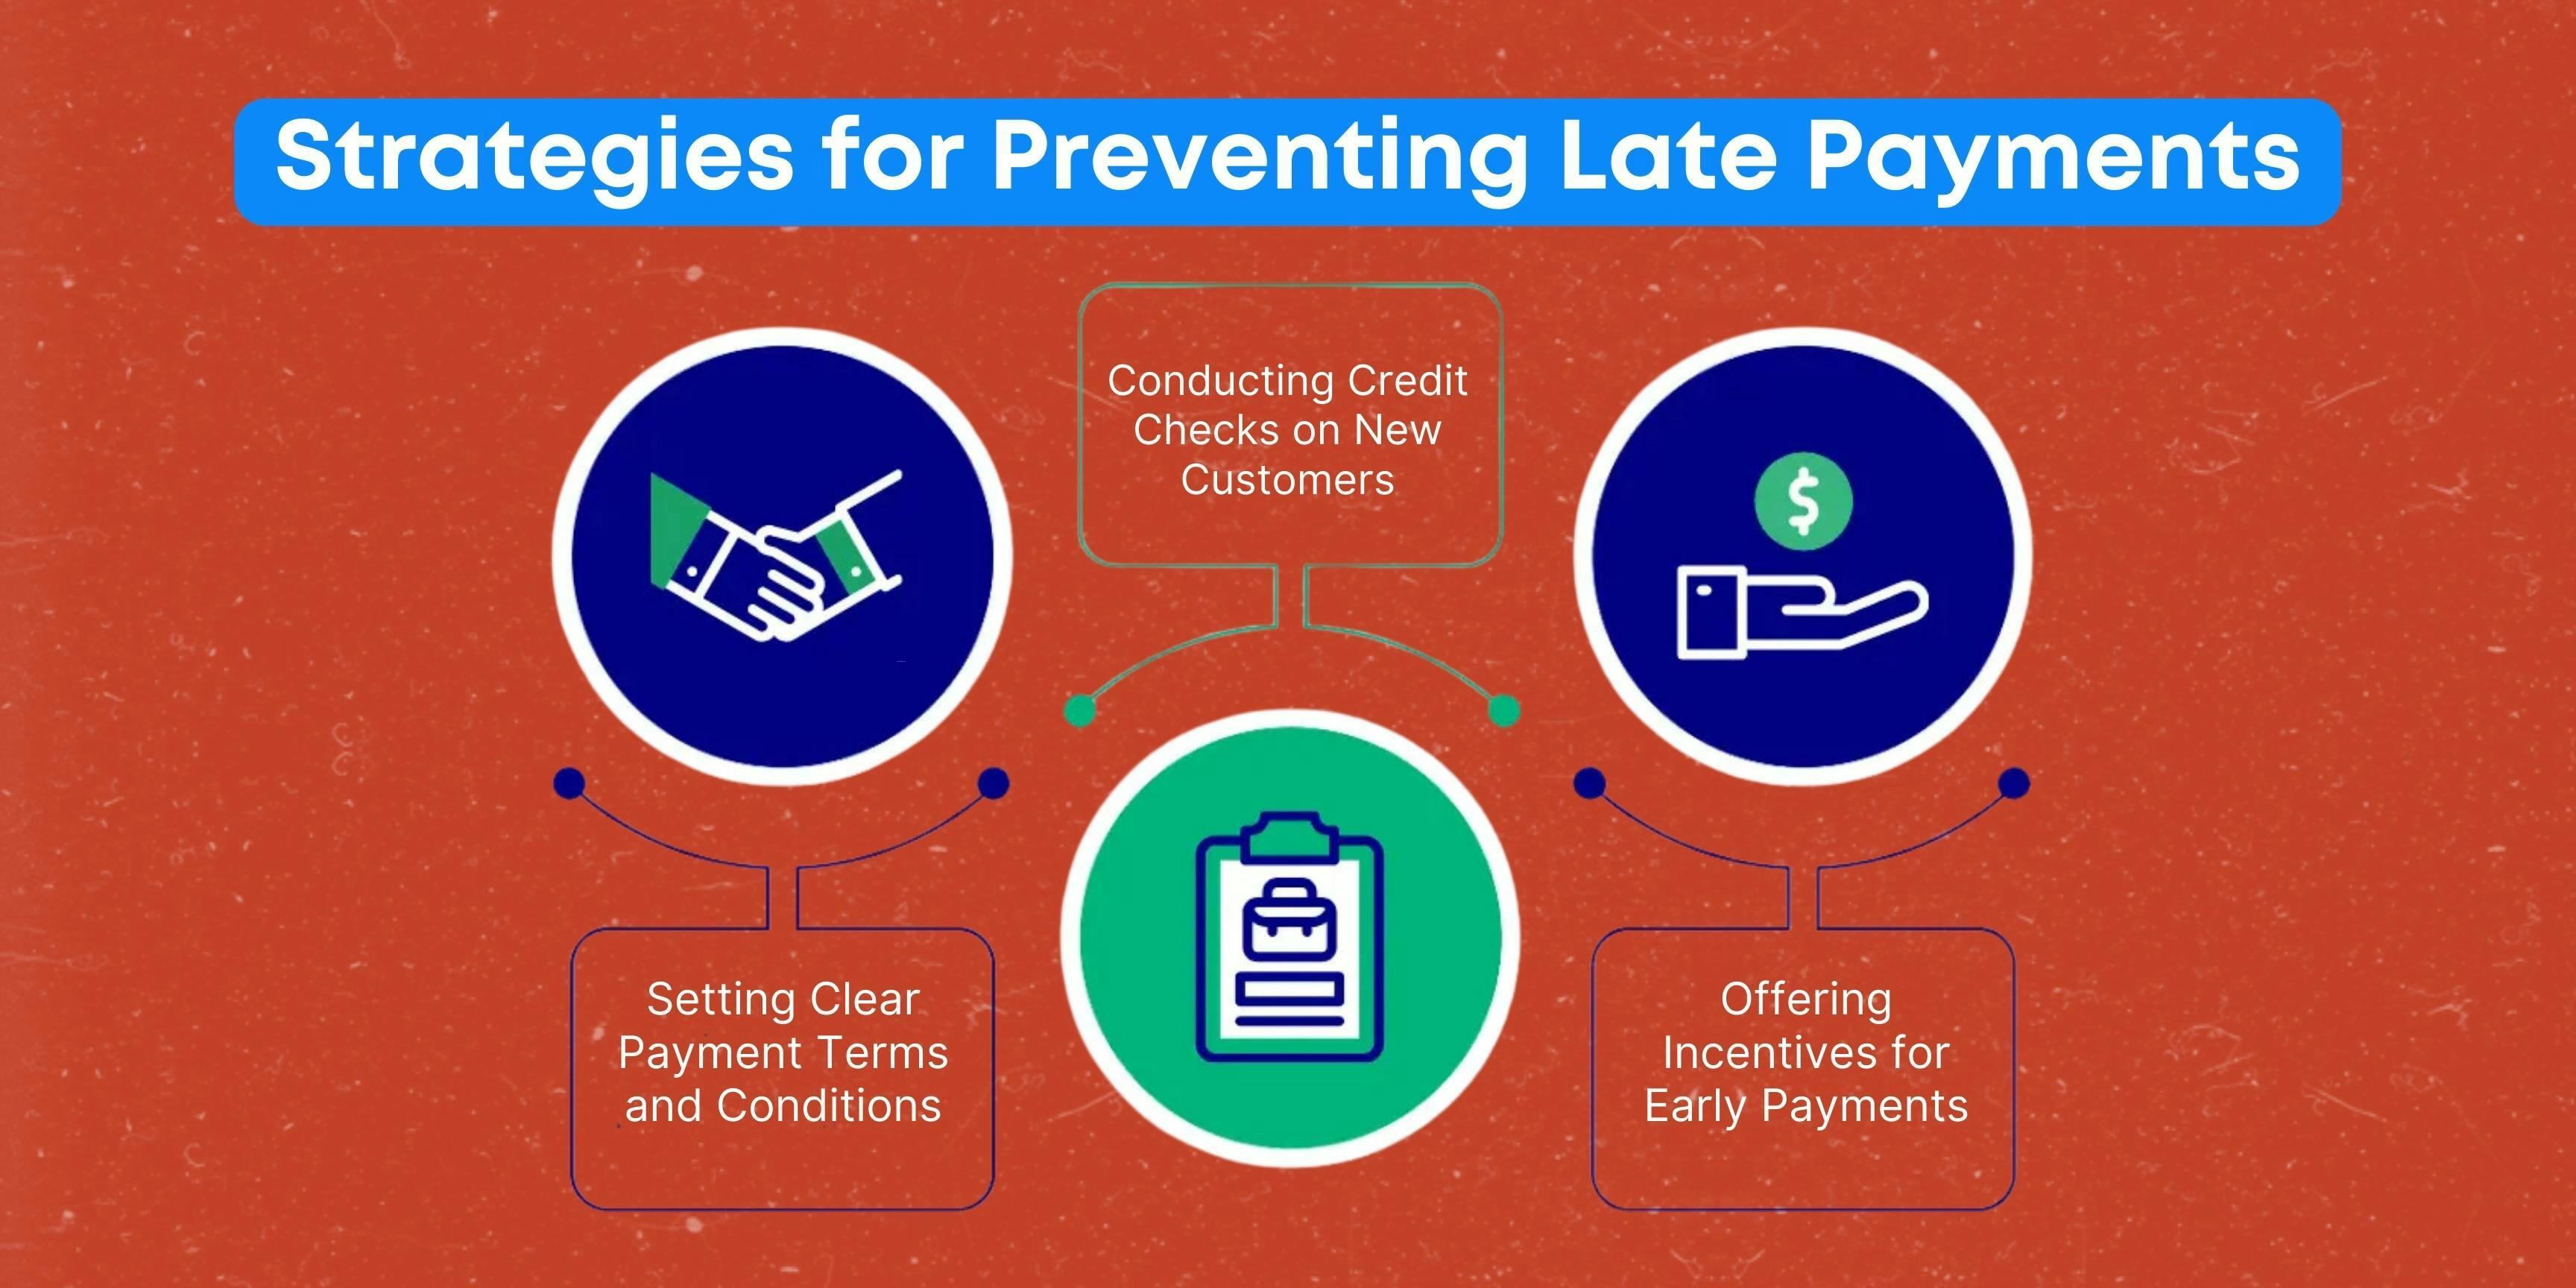 Strategies for Preventing Late Payments